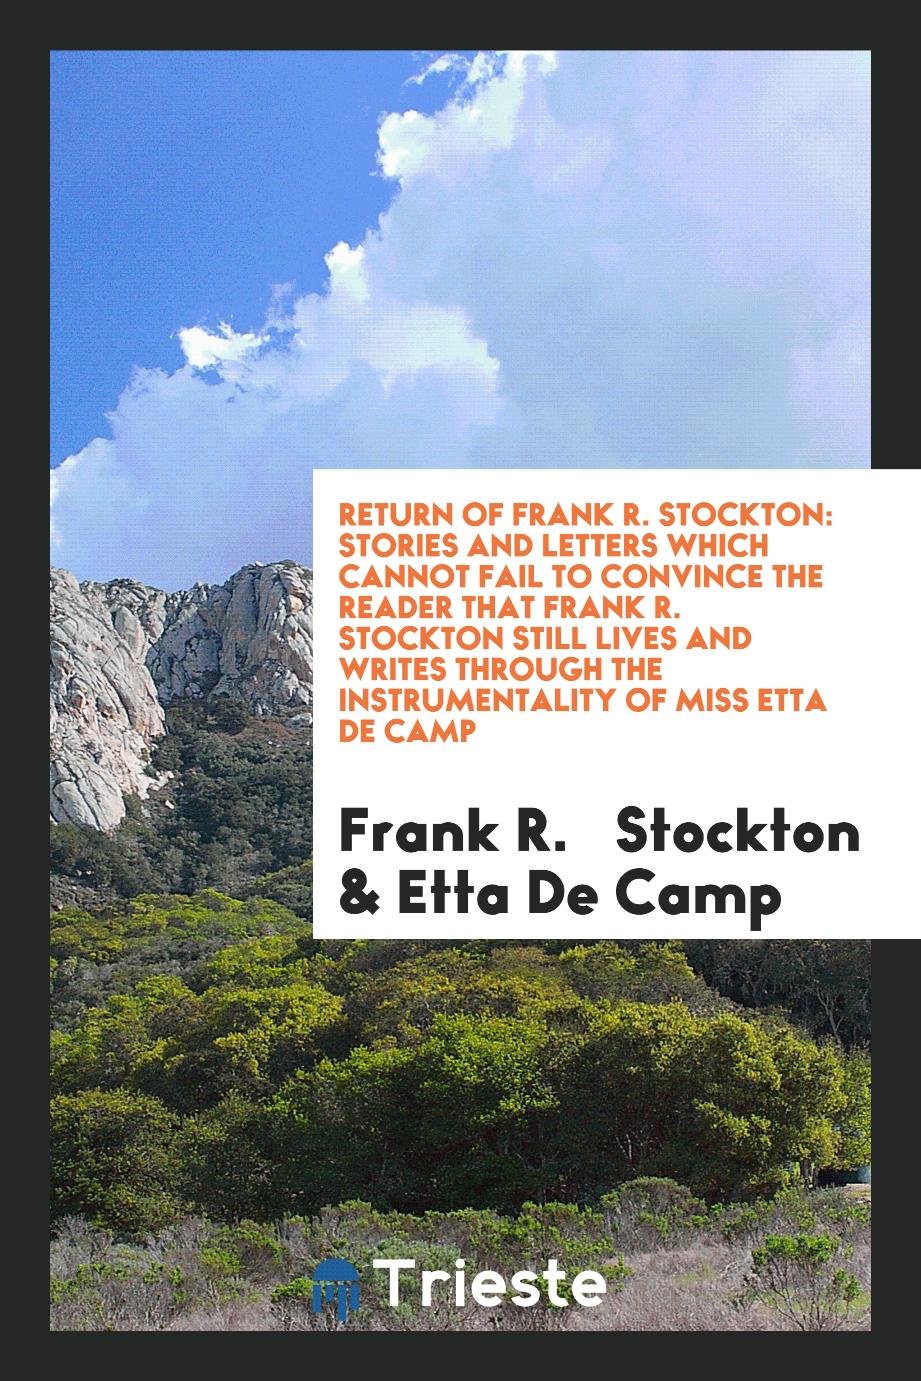 Return of Frank R. Stockton: Stories and Letters Which Cannot Fail to Convince the Reader That Frank R. Stockton Still Lives and Writes Through the Instrumentality of Miss Etta De Camp